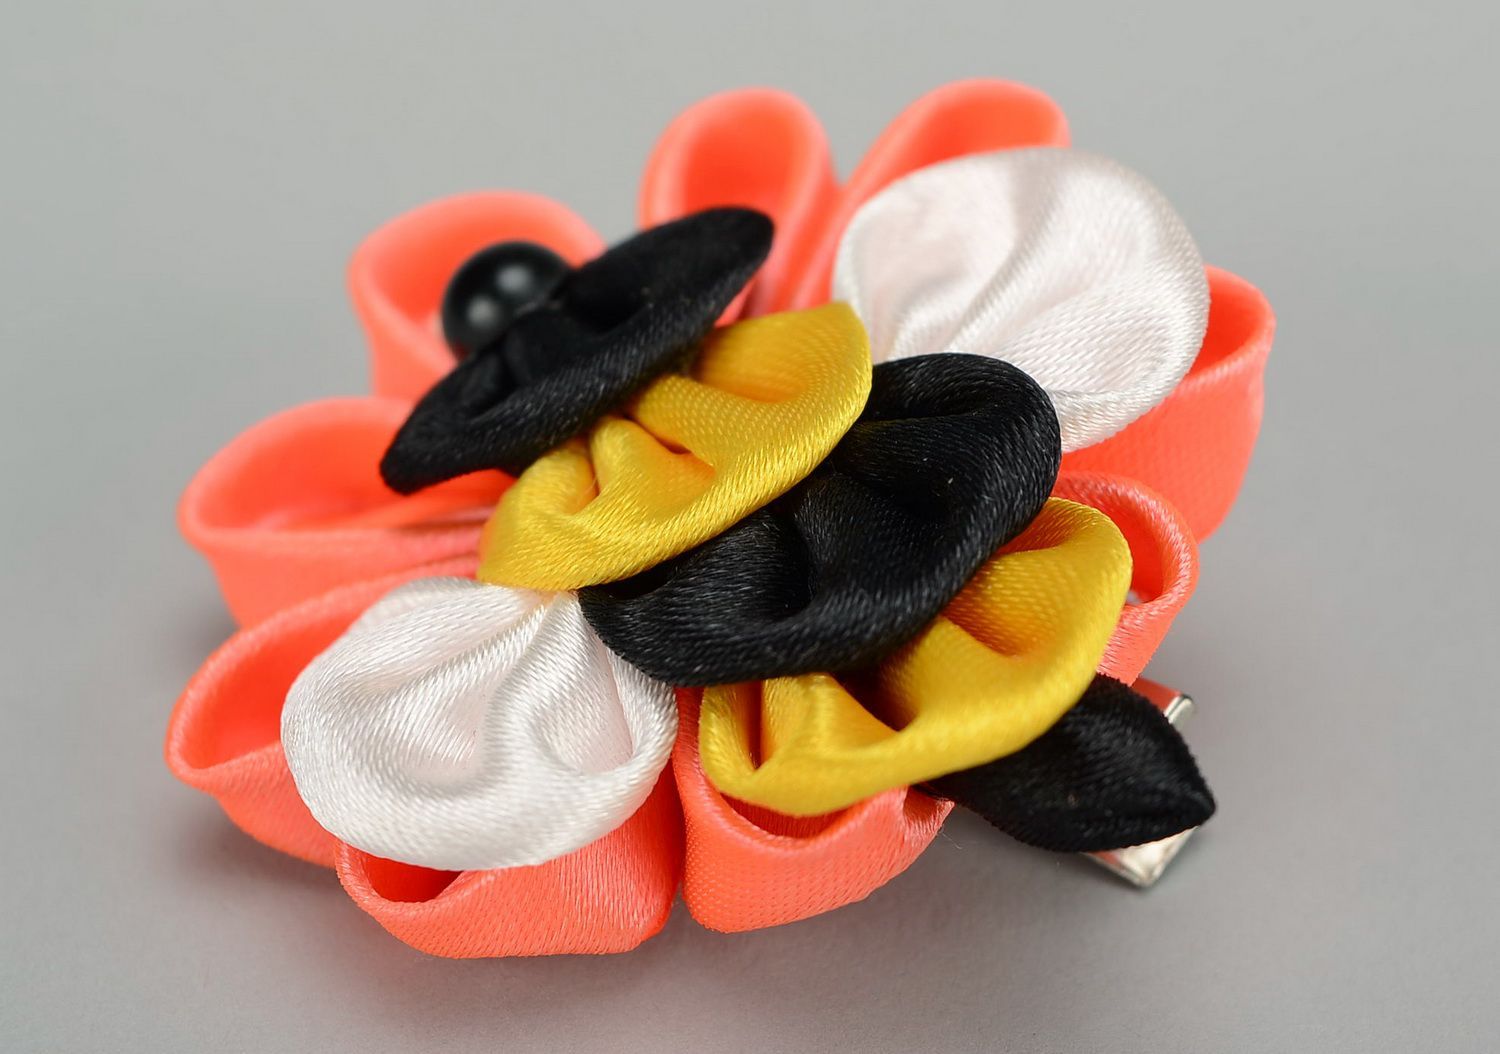 Decorative barrette made from satin ribbons photo 3